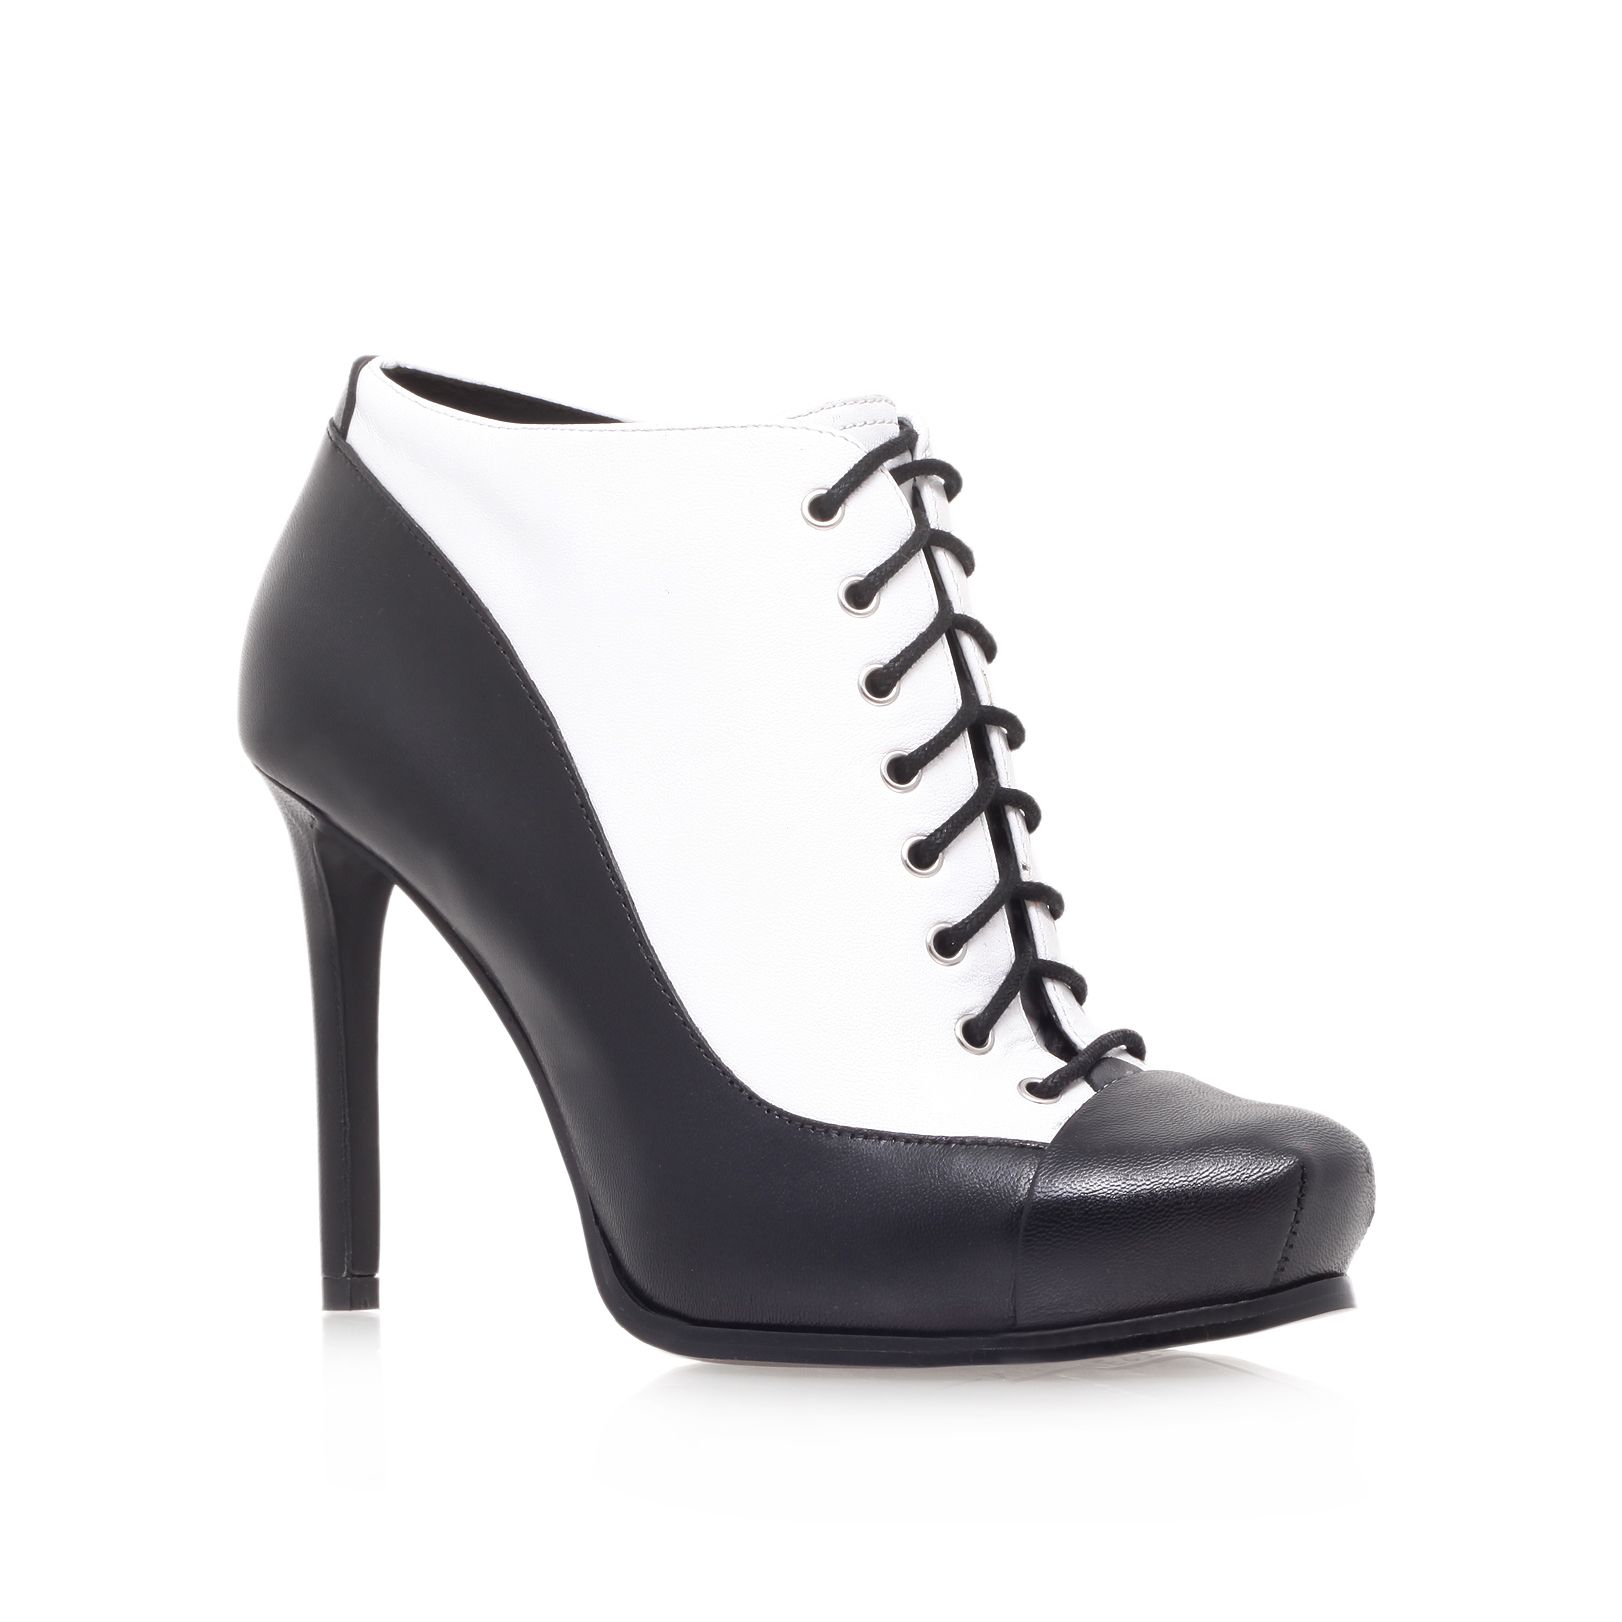 Nine west oliviana high heel ankle boots. , ankle boots , high (80mm ...